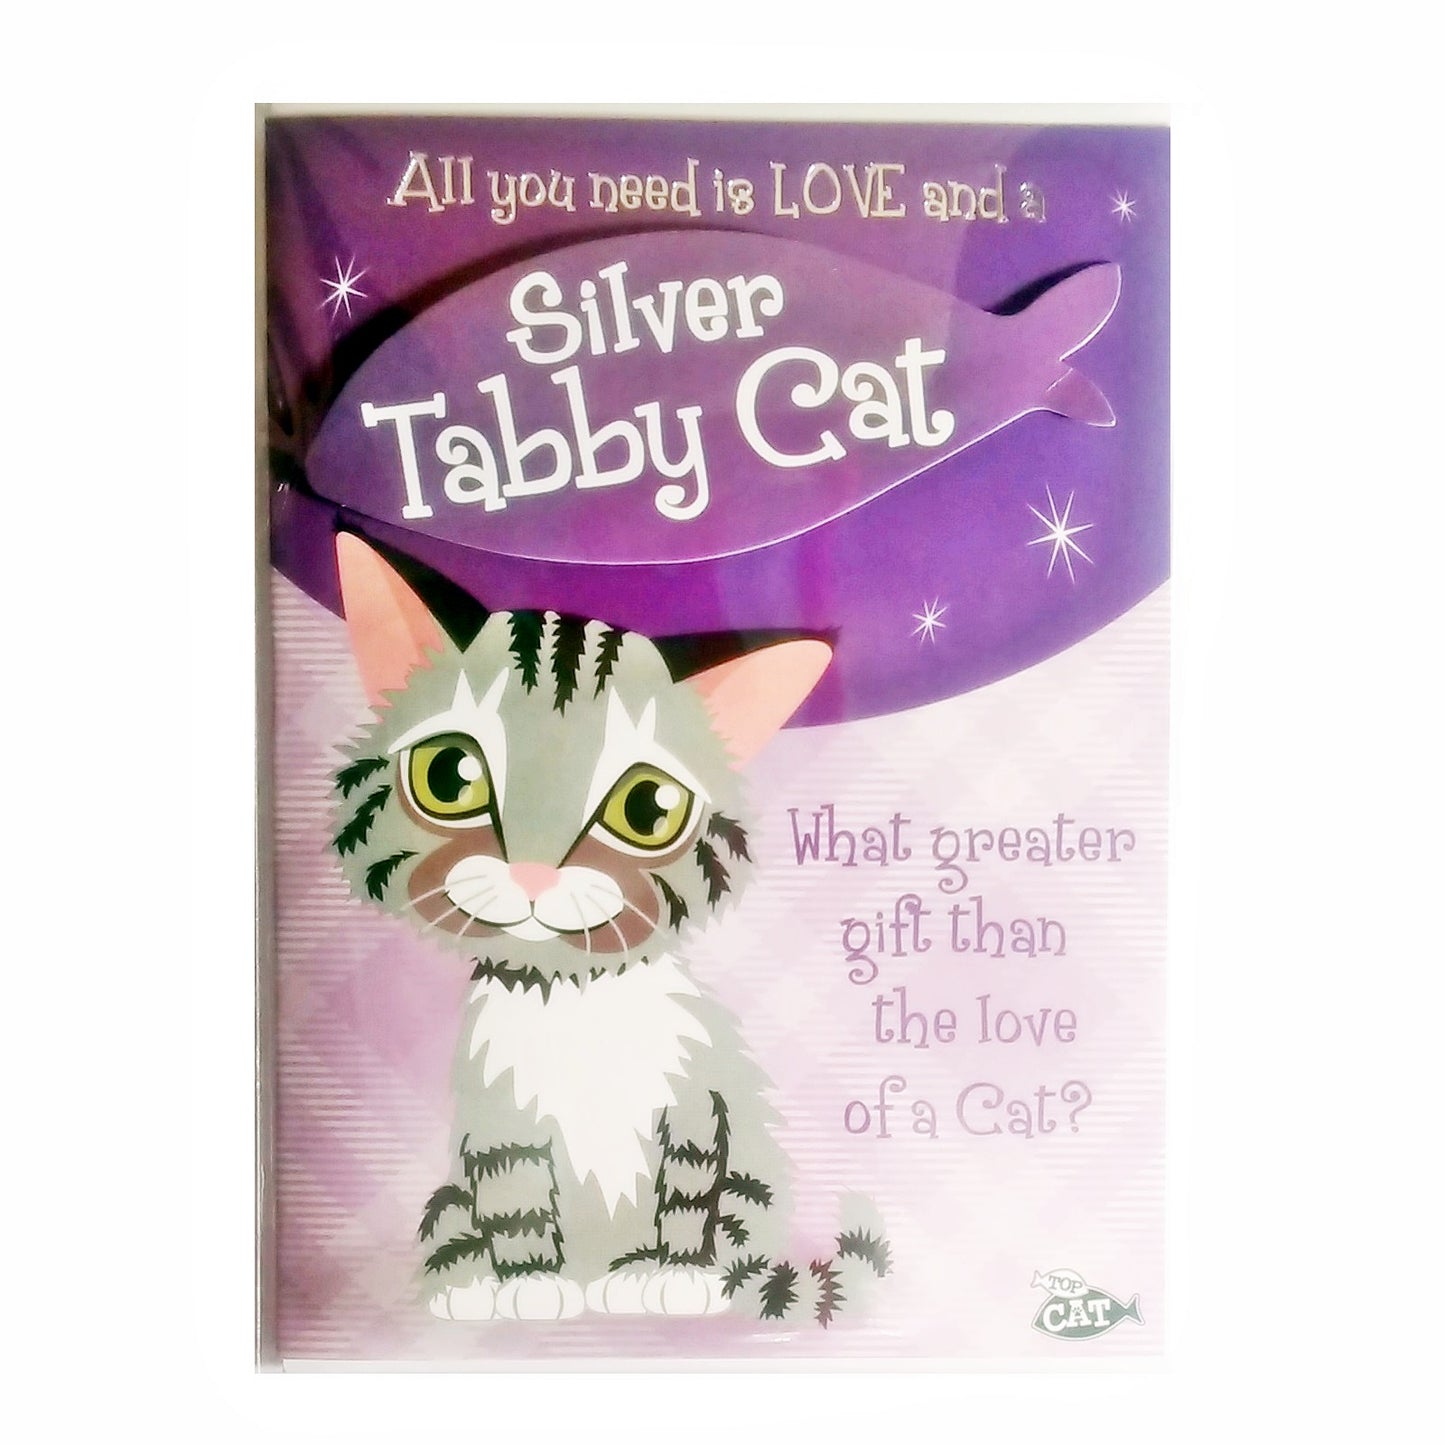 Wags & Whiskers Cat Greeting Card "Silver Tabby Wags & Whiskers Cat Nap Loving" by Paper Island